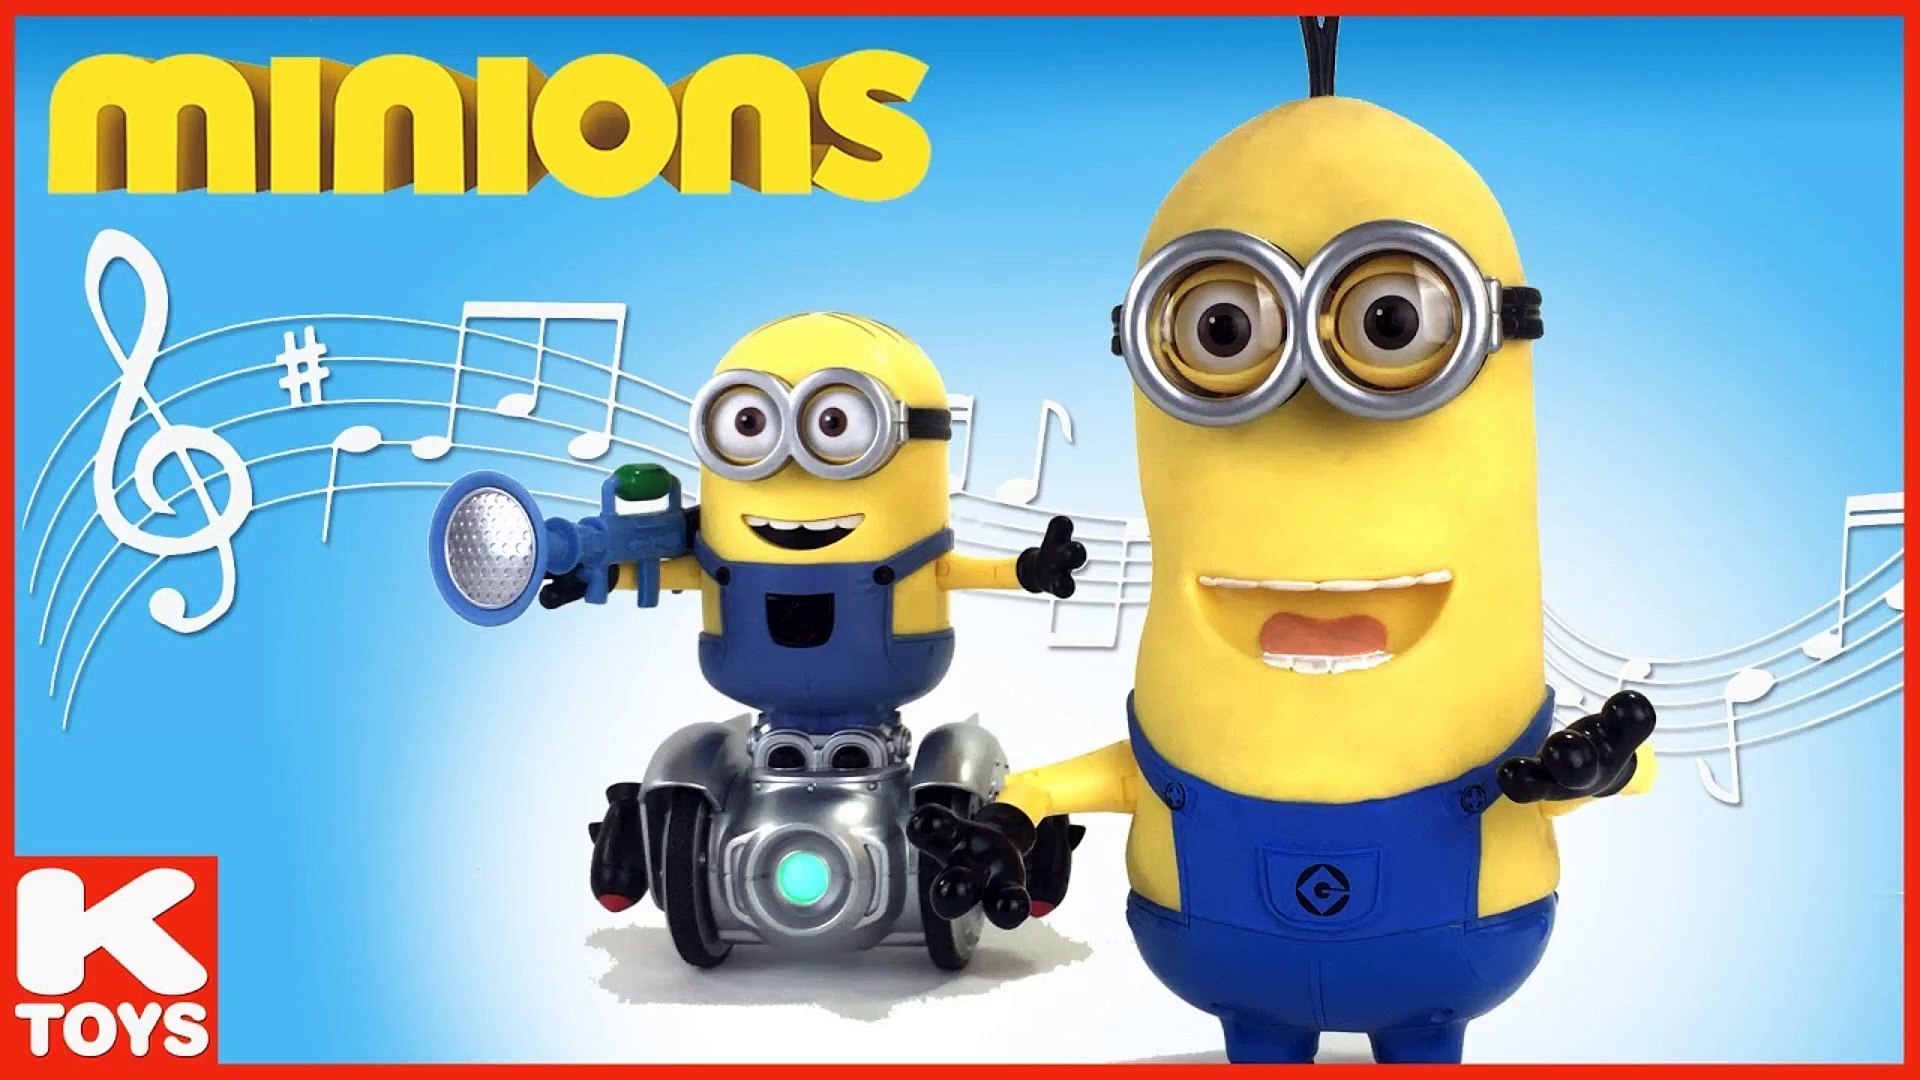 Minions - Singing and Talking Tim with Turbo Dave from Despicable Me